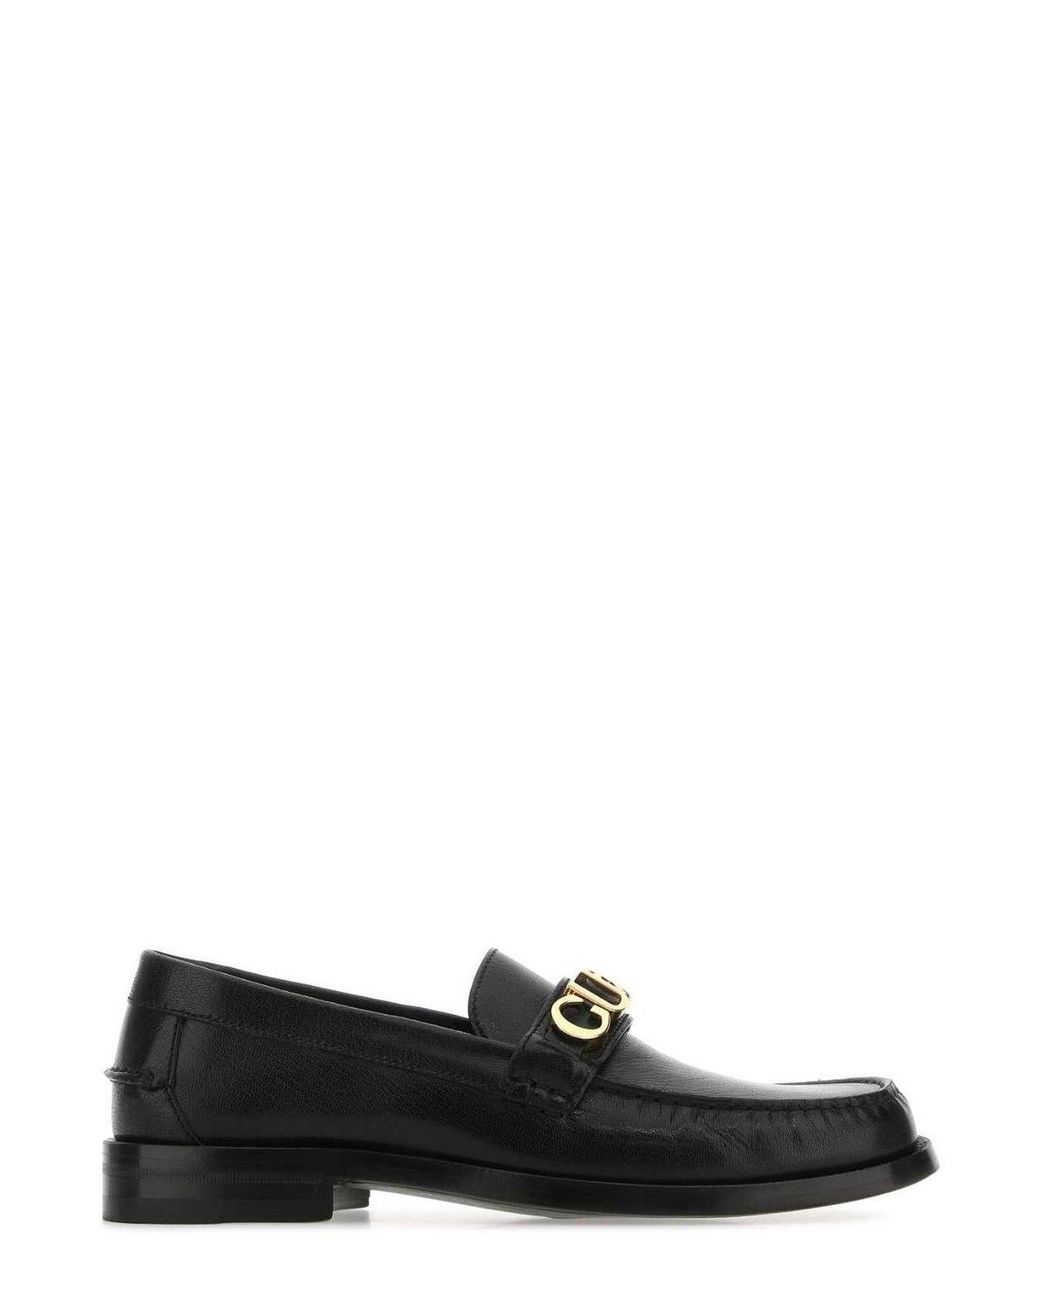 Gucci Logo Plaque Slip-on Loafers in Black | Lyst